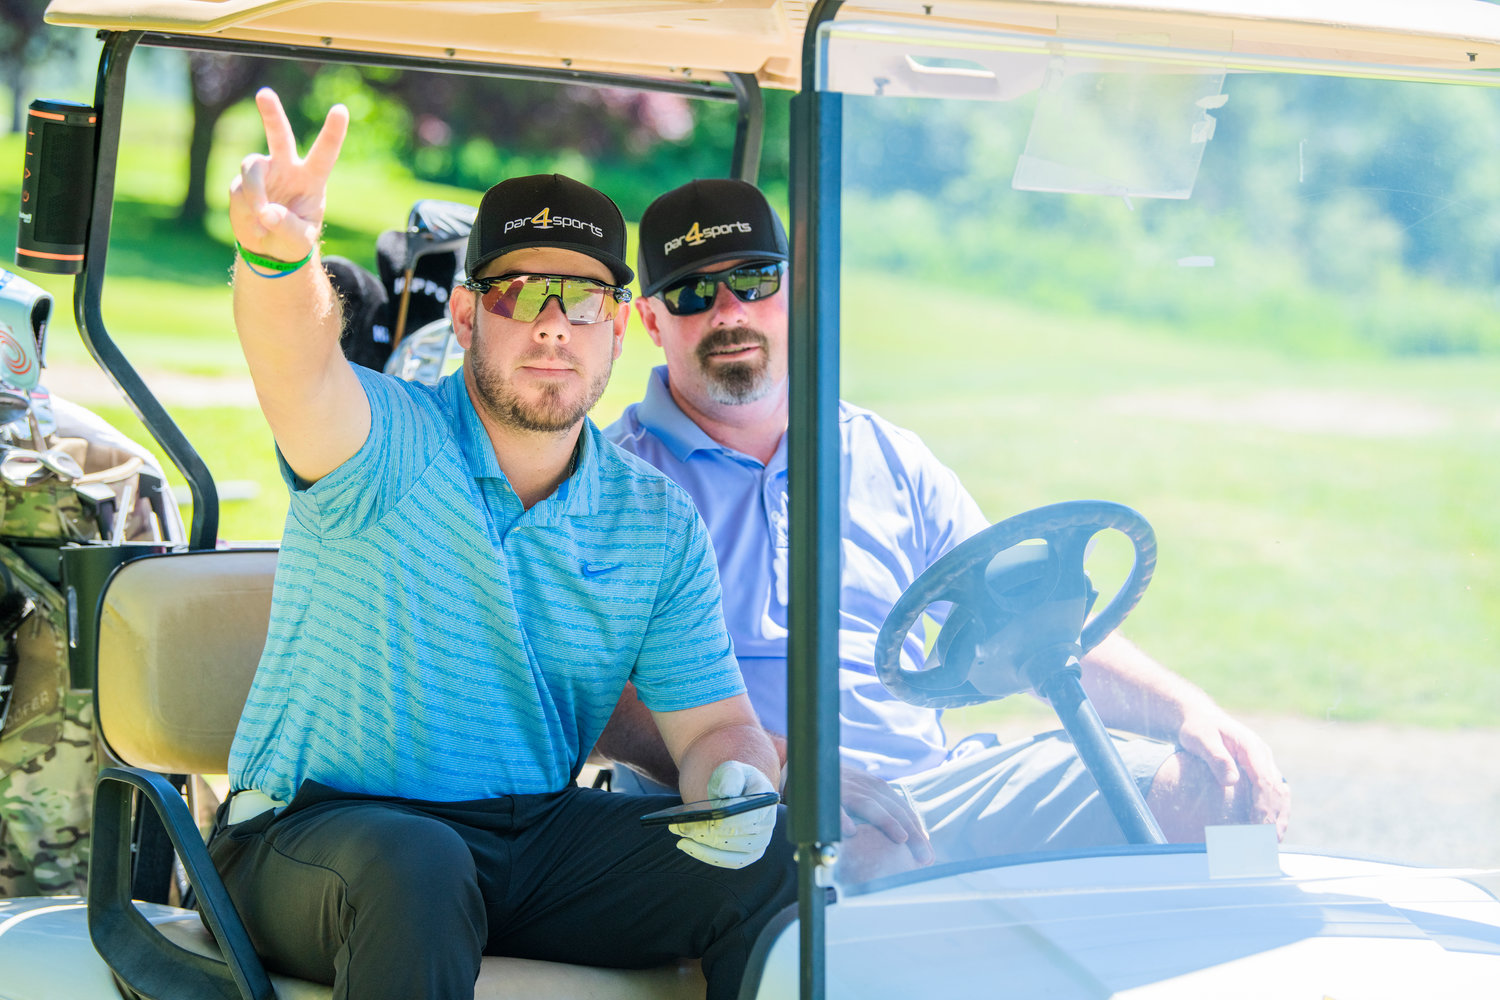 Professional golfer Brady Calkins, a W.F. West High School graduate, sports a Par 4 Sports hat after teeing off during a charity tournament at Riverside Golf Course in Chehalis on Friday. Calkins played in the U.S. Open last weekend.